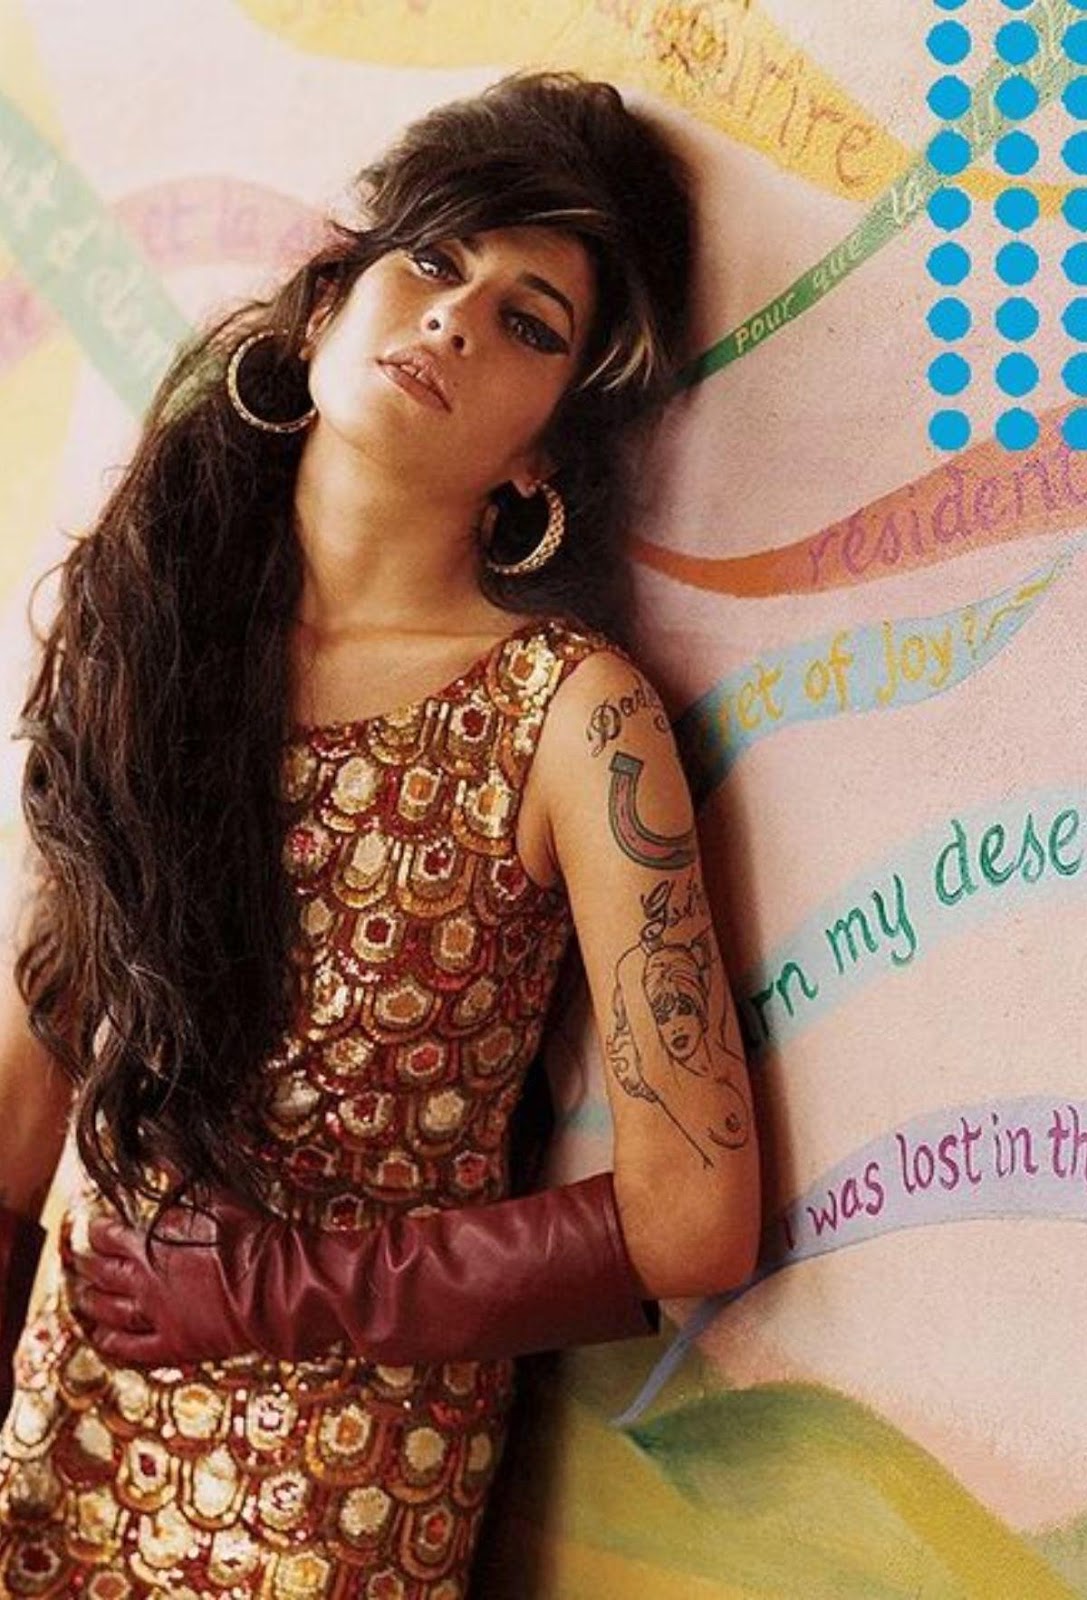 Winehouse was a style and musical icon whose work influenced years after her death